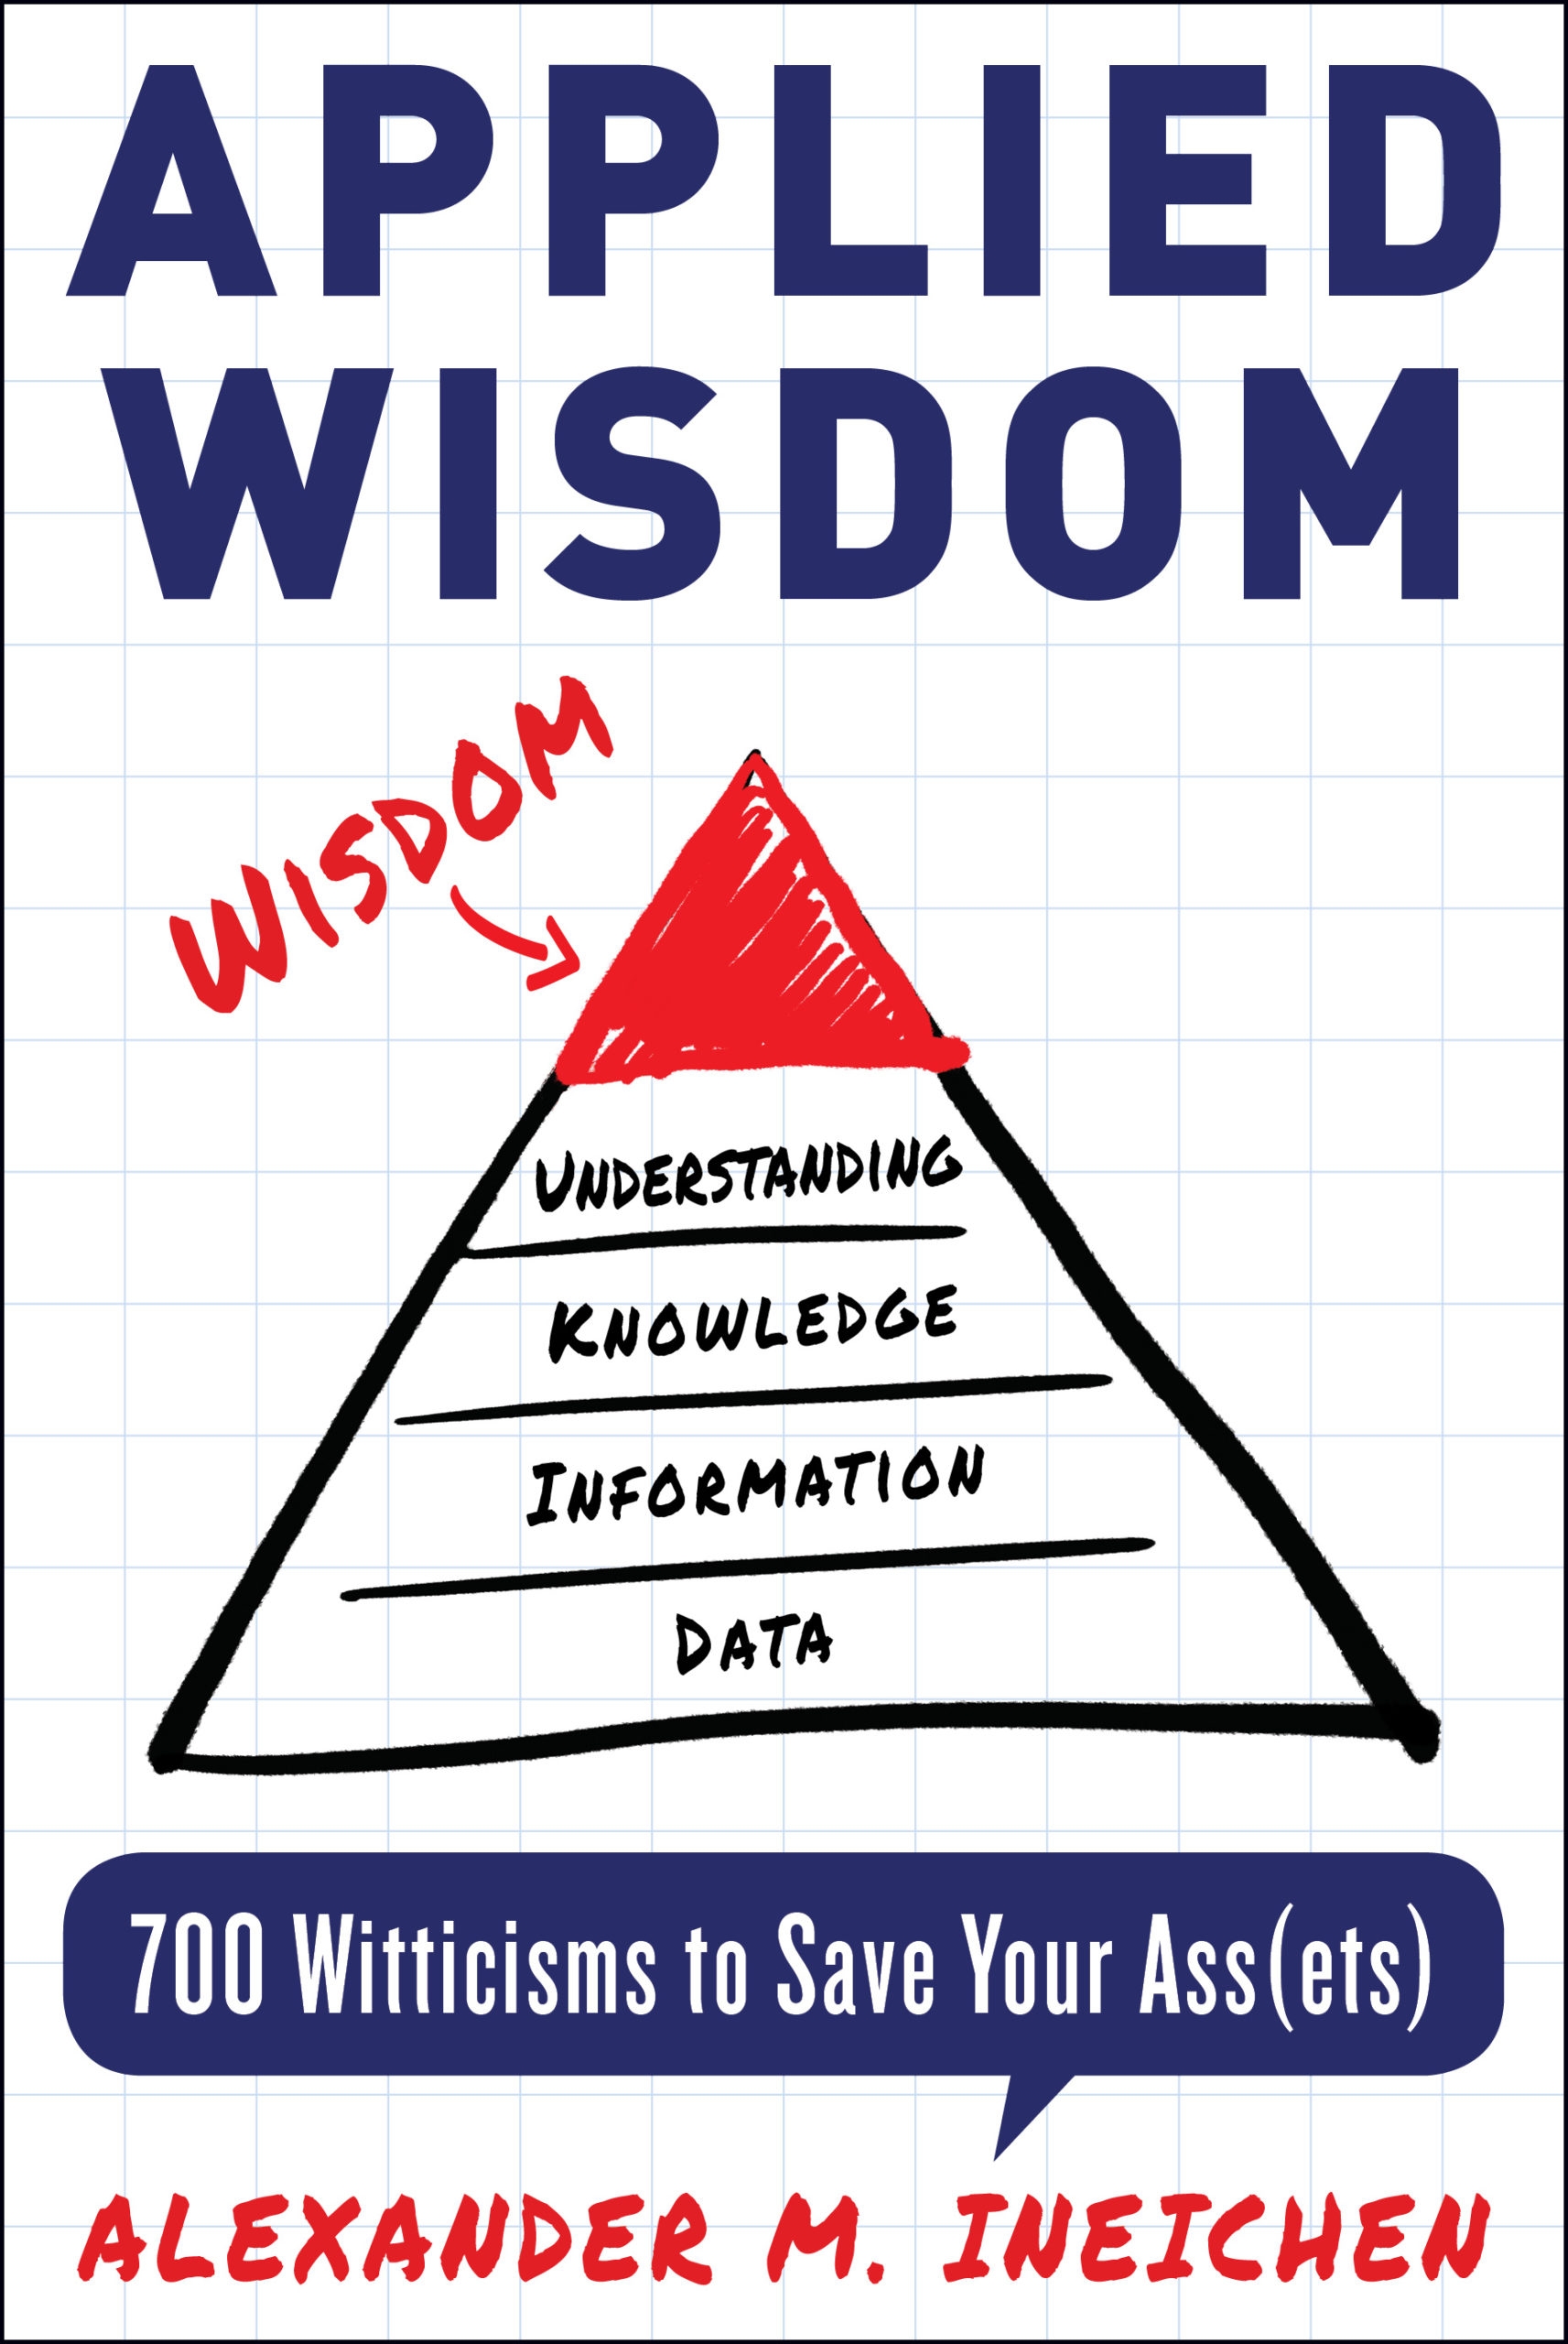 Applied Wisdom: 700 Witticisms to Save Your Ass(ets), a book by Alexander Ineichen